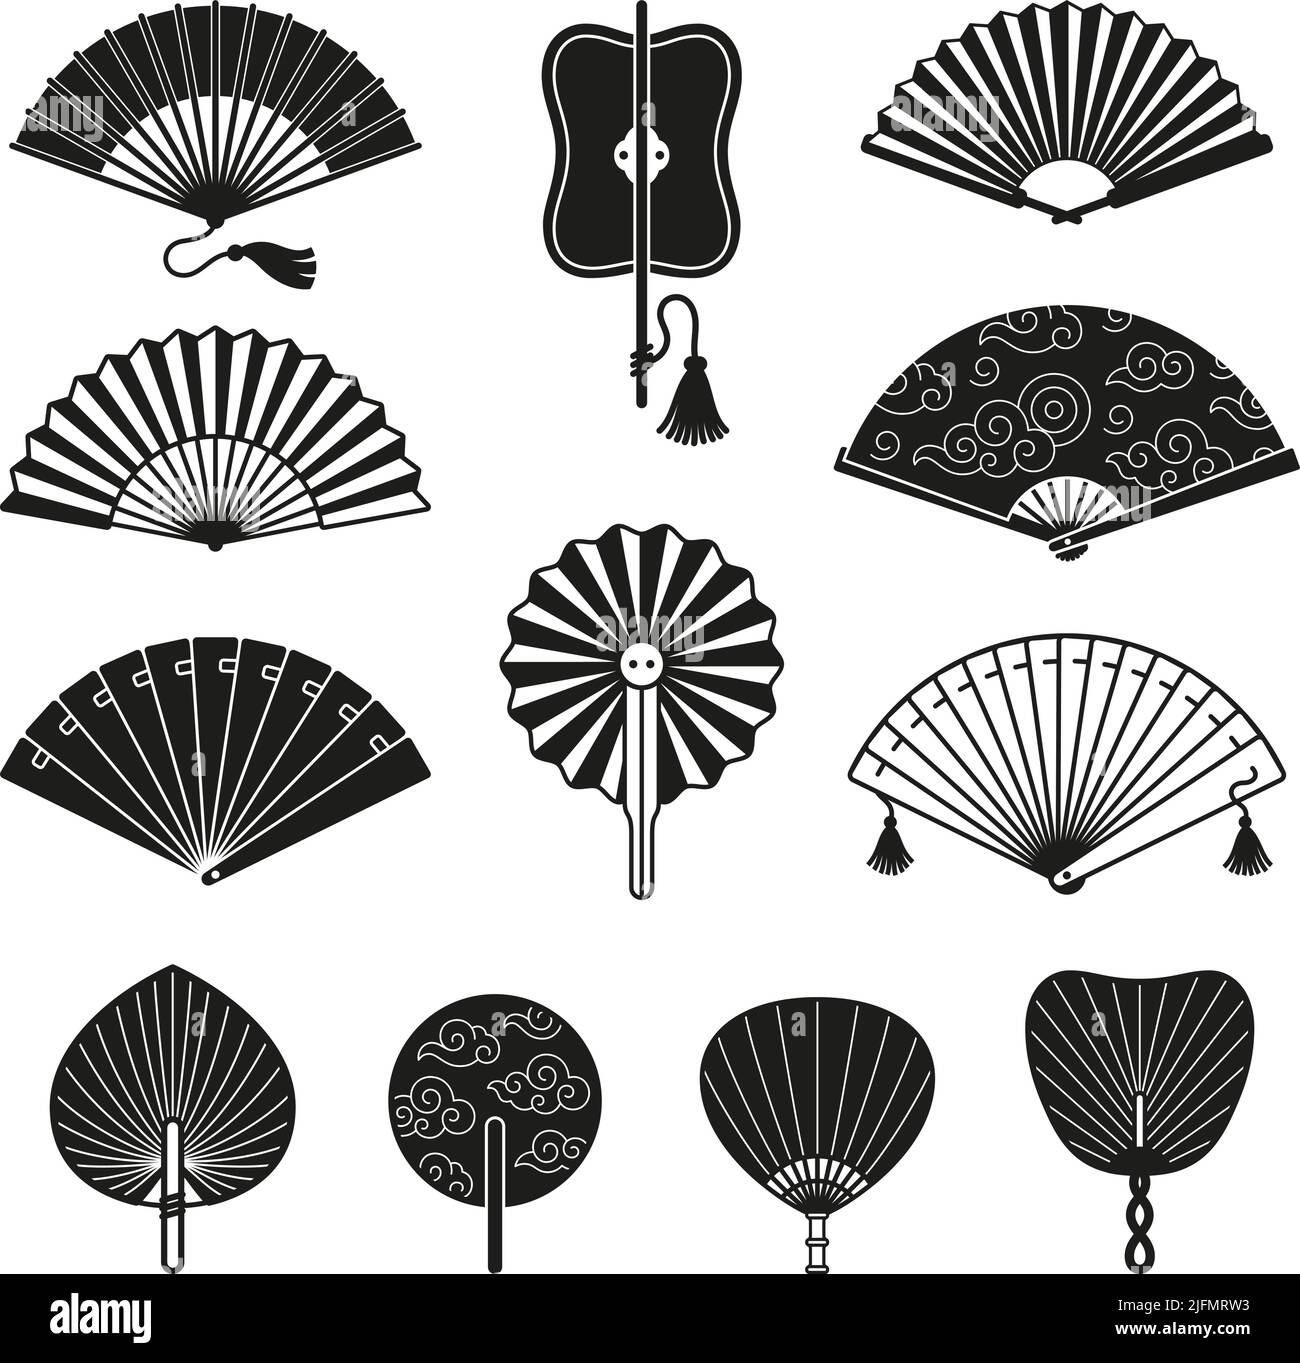 Black japanese fan icons. Dance elegant asian fans design isolated on white background. Simple handheld fanning oriental symbols, chinese tidy vector Stock Vector